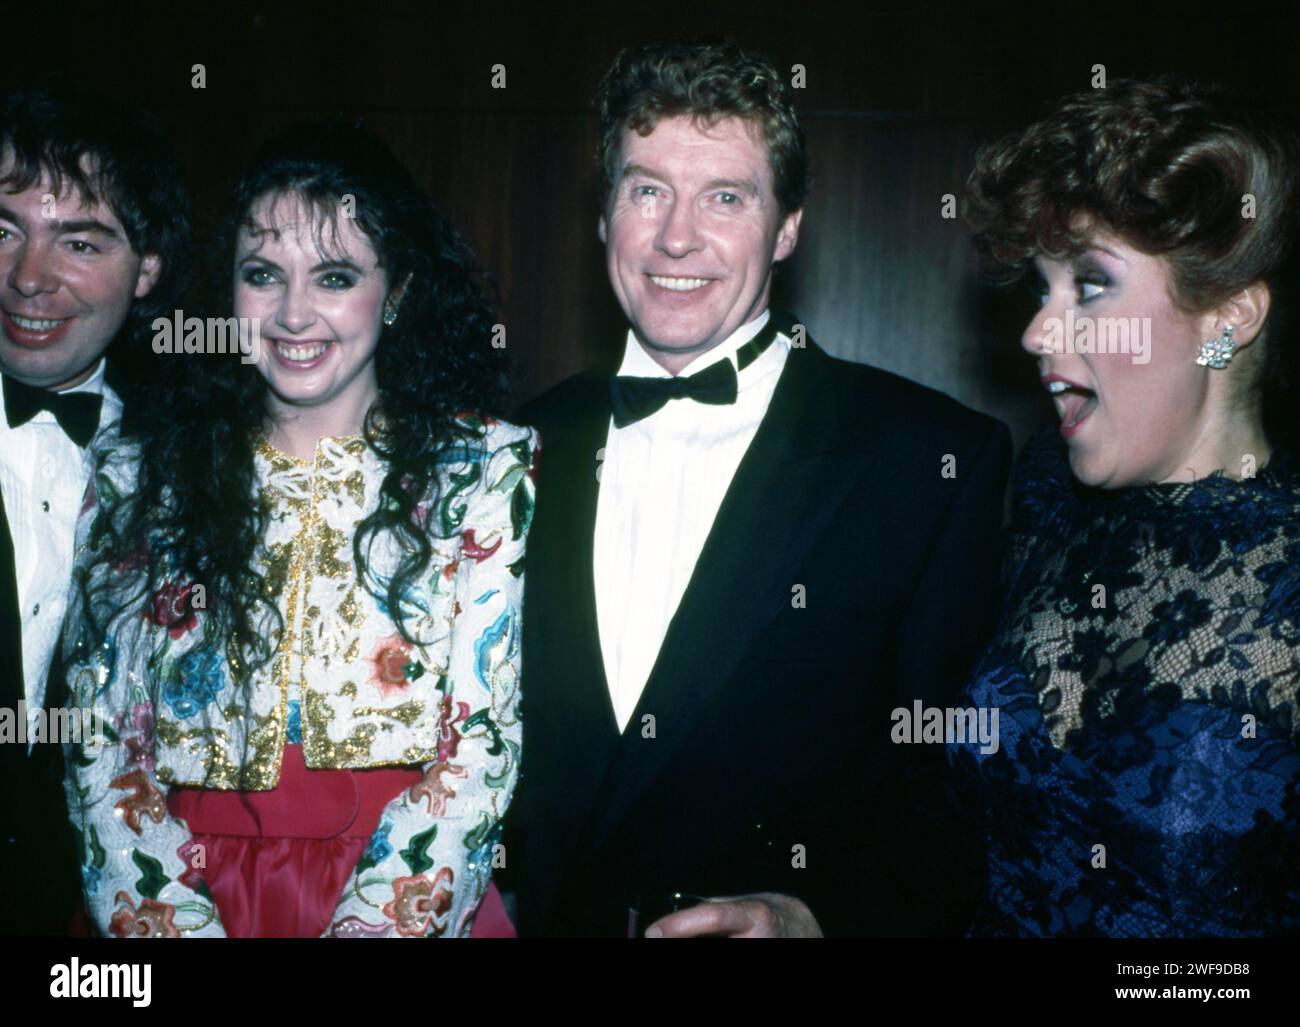 Andew Lloyd Weber (left), Sarah Brightman (second from left), and Michael Crawford at the opening of Phantom of the Opera, at the Beekman Theatre in New York, Jan. 1988.  Photo: Oscar Abolafia/Everett Collection  (michaelcrawford001) Stock Photo